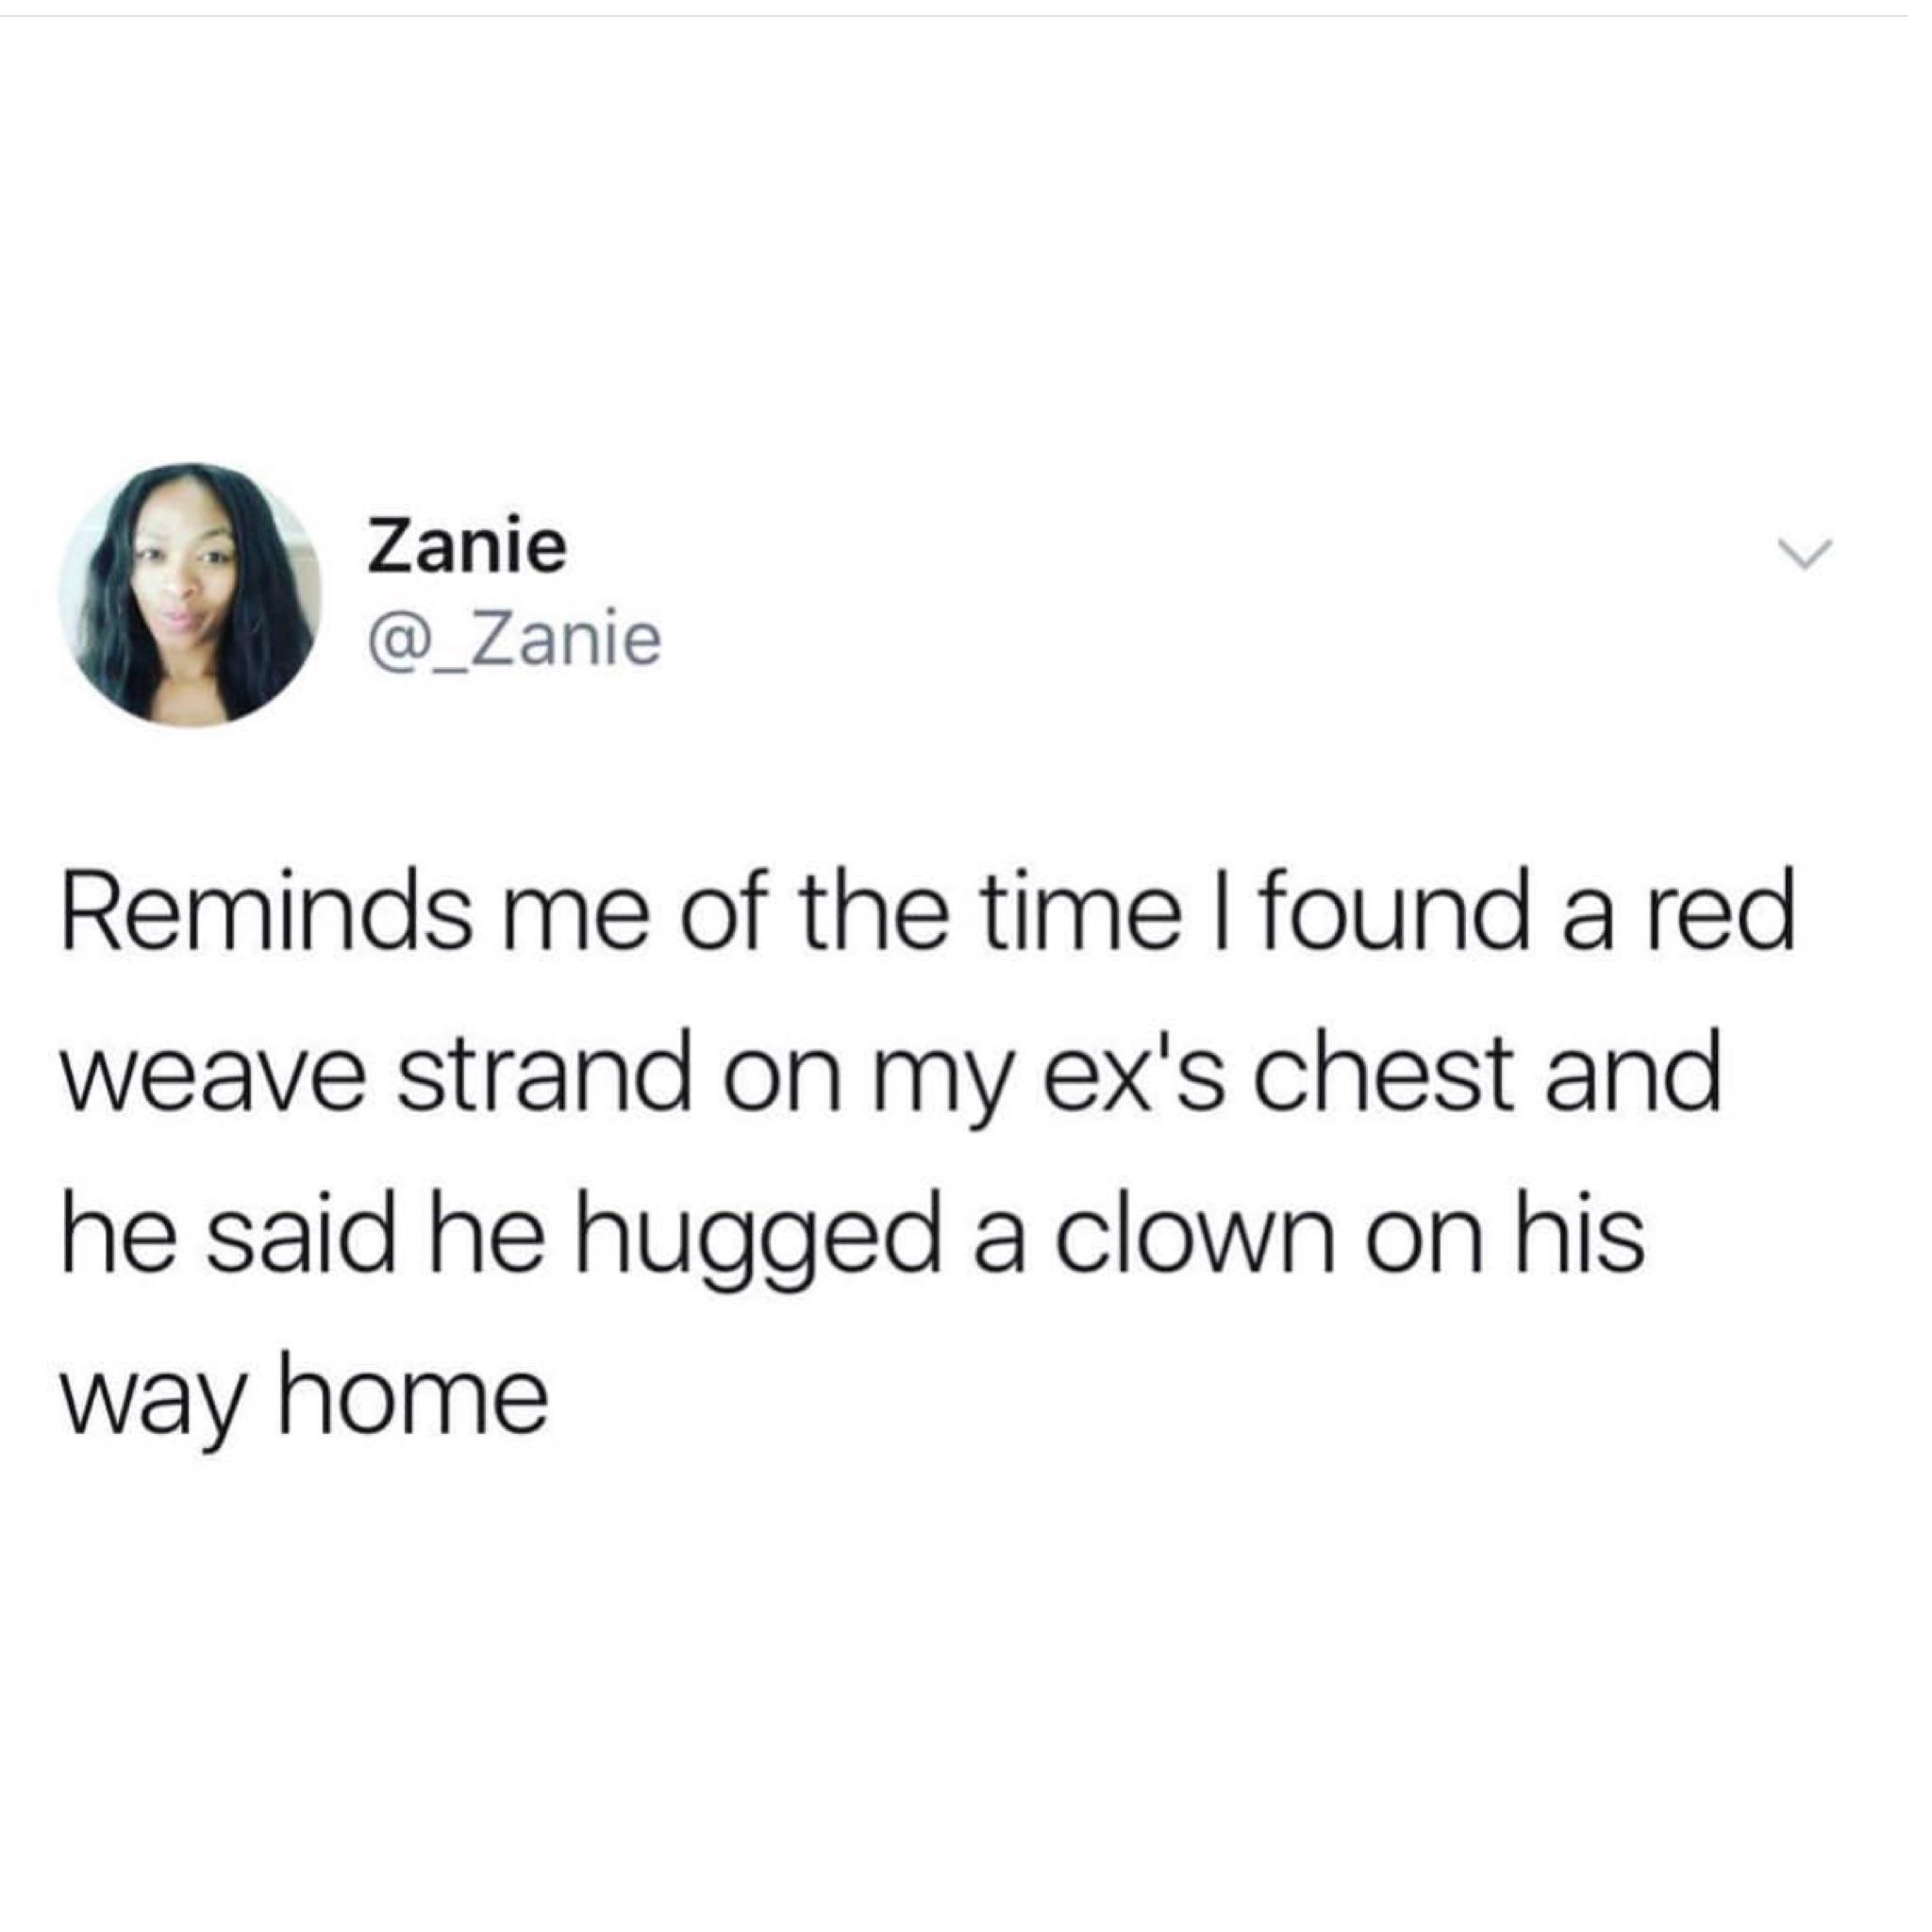 have a dark sense of humour - Zanie Reminds me of the time I found a red weave strand on my ex's chest and he said he hugged a clown on his way home